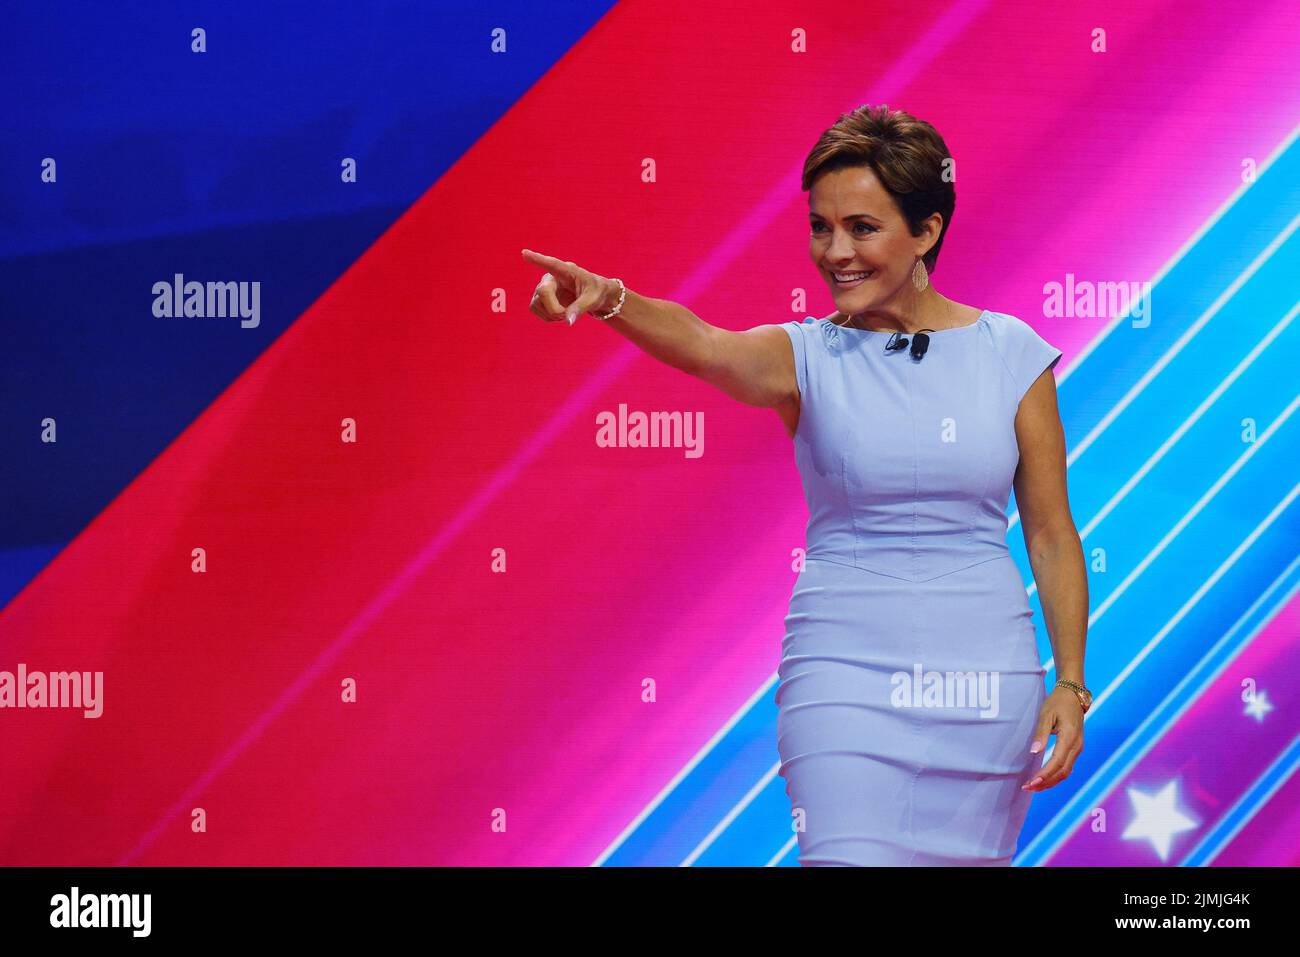 Republican candidate for Arizona Governor Kari Lake takes the stage to speak at the Conservative Political Action Conference (CPAC) in Dallas, Texas, U.S., August 6, 2022.  REUTERS/Brian Snyder Stock Photo